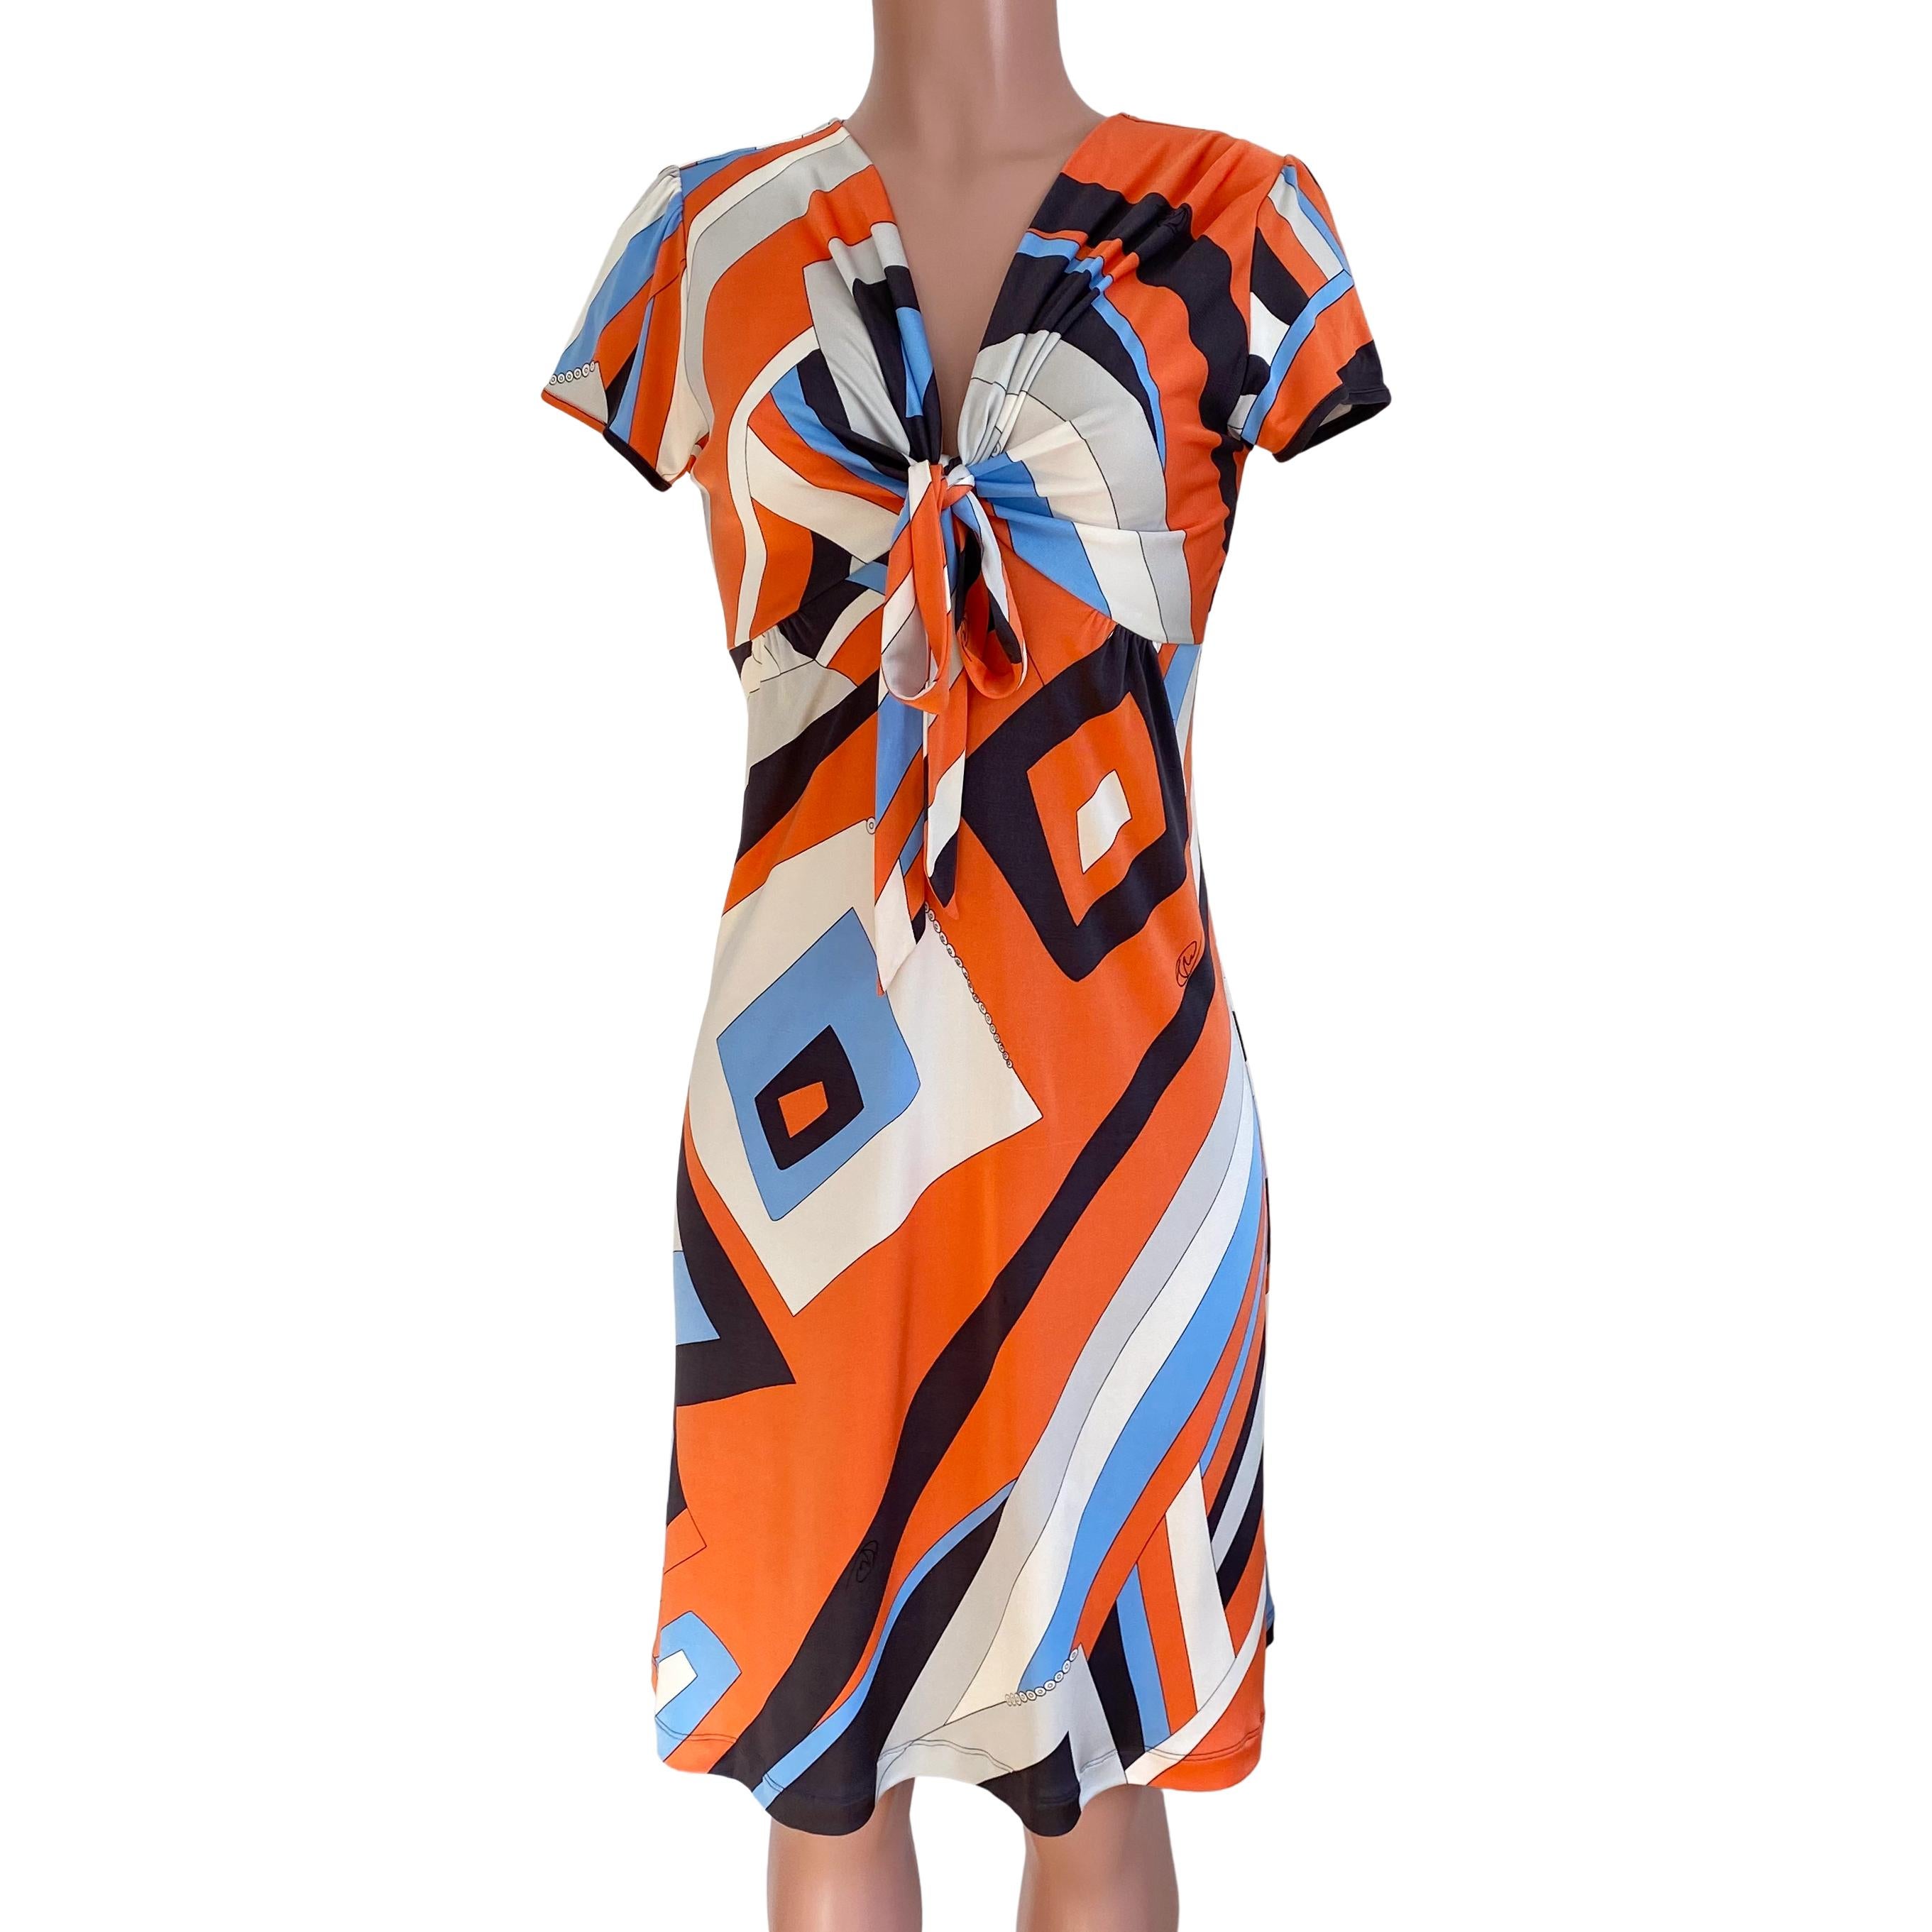 Easy puff sleeve shift with self tie for a perfect, flattering fit.
Signed abstract print 

FLORA KUNG silk dresses are made in premiere quality, long-filament silk yarn which gives a natural simmering glow and a luxurious feel.
Each dress will look